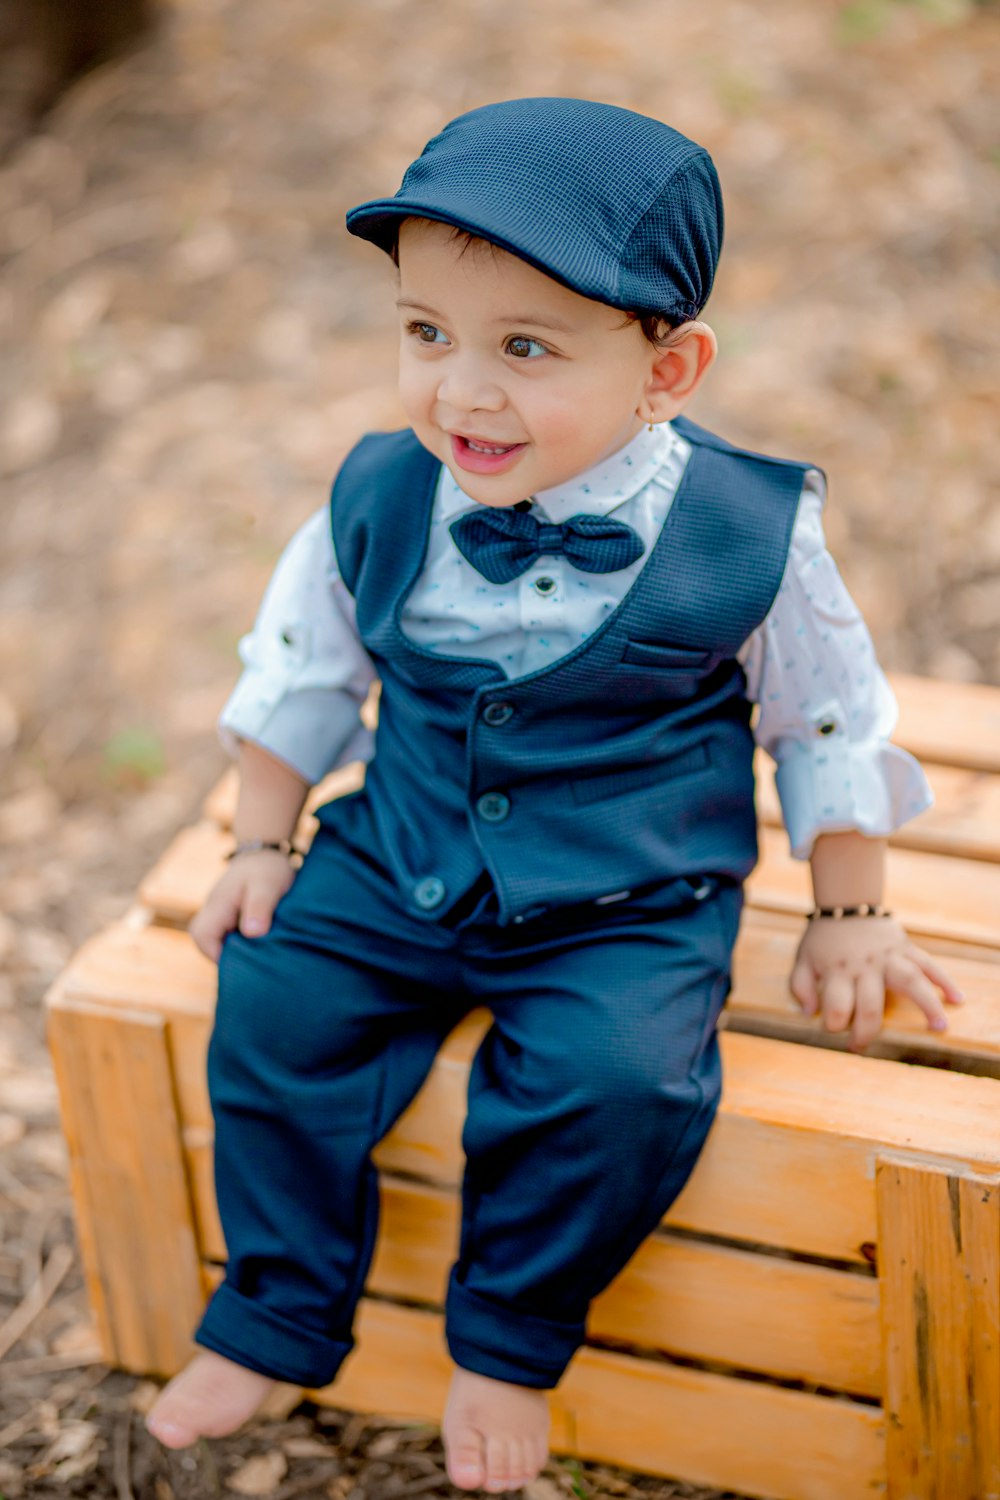 a young boy in a blue suit and hat sitting on a wooden bench